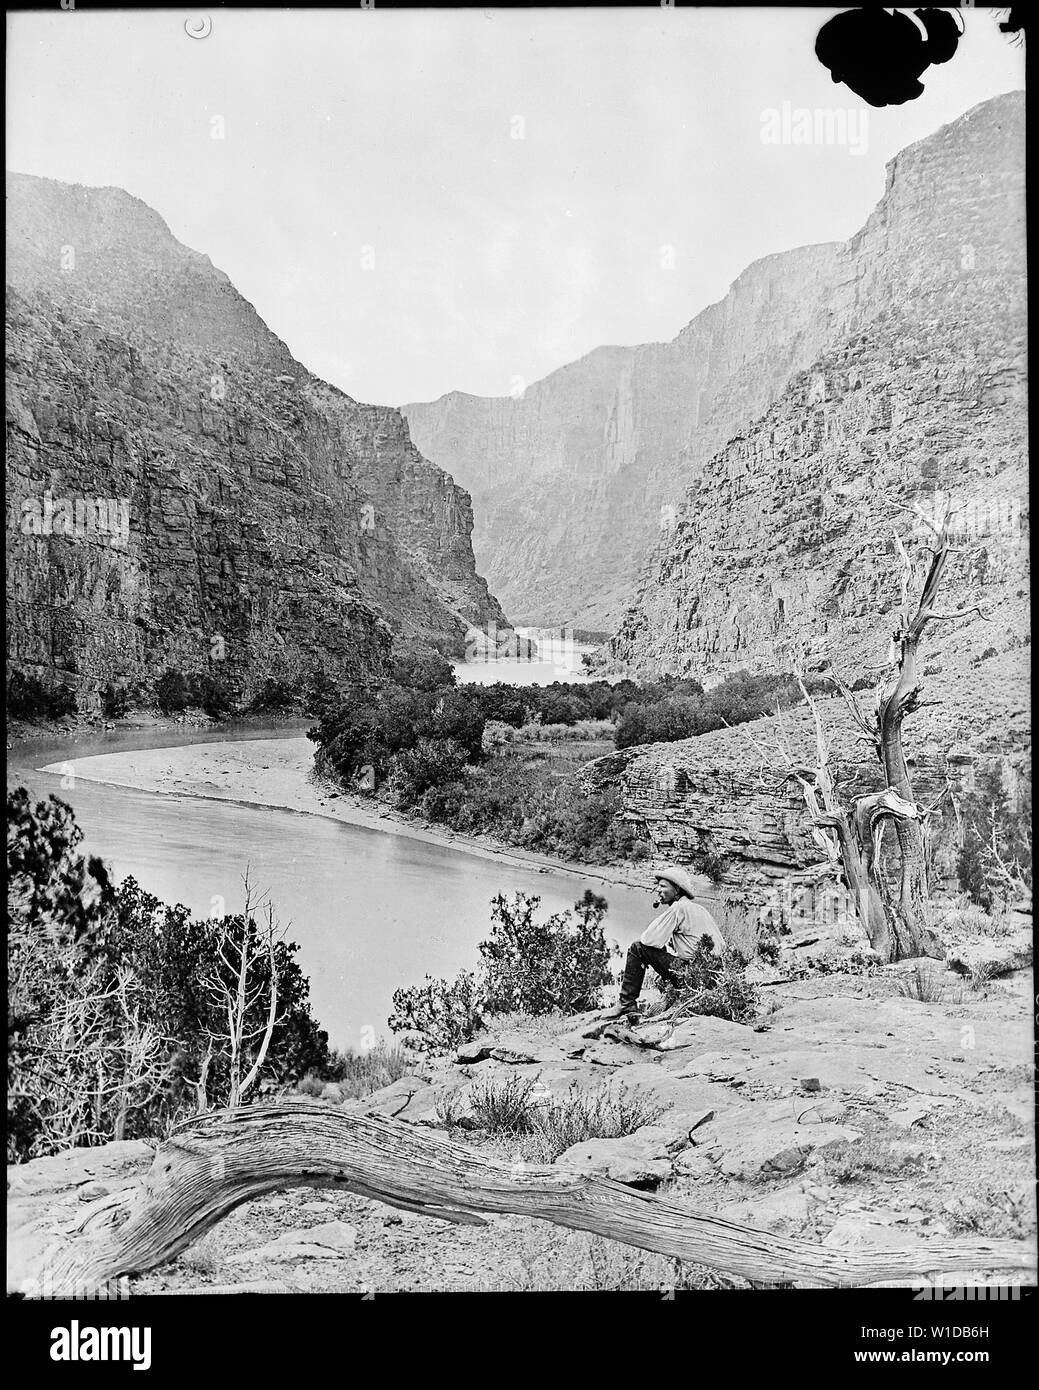 Gate of Lodore, Green River, N.W. Colorado? *James C. Pilling sitting peacefully on the bank smoking his pipe and wearing knee high leather boots., 1871 - 1878 Stock Photo